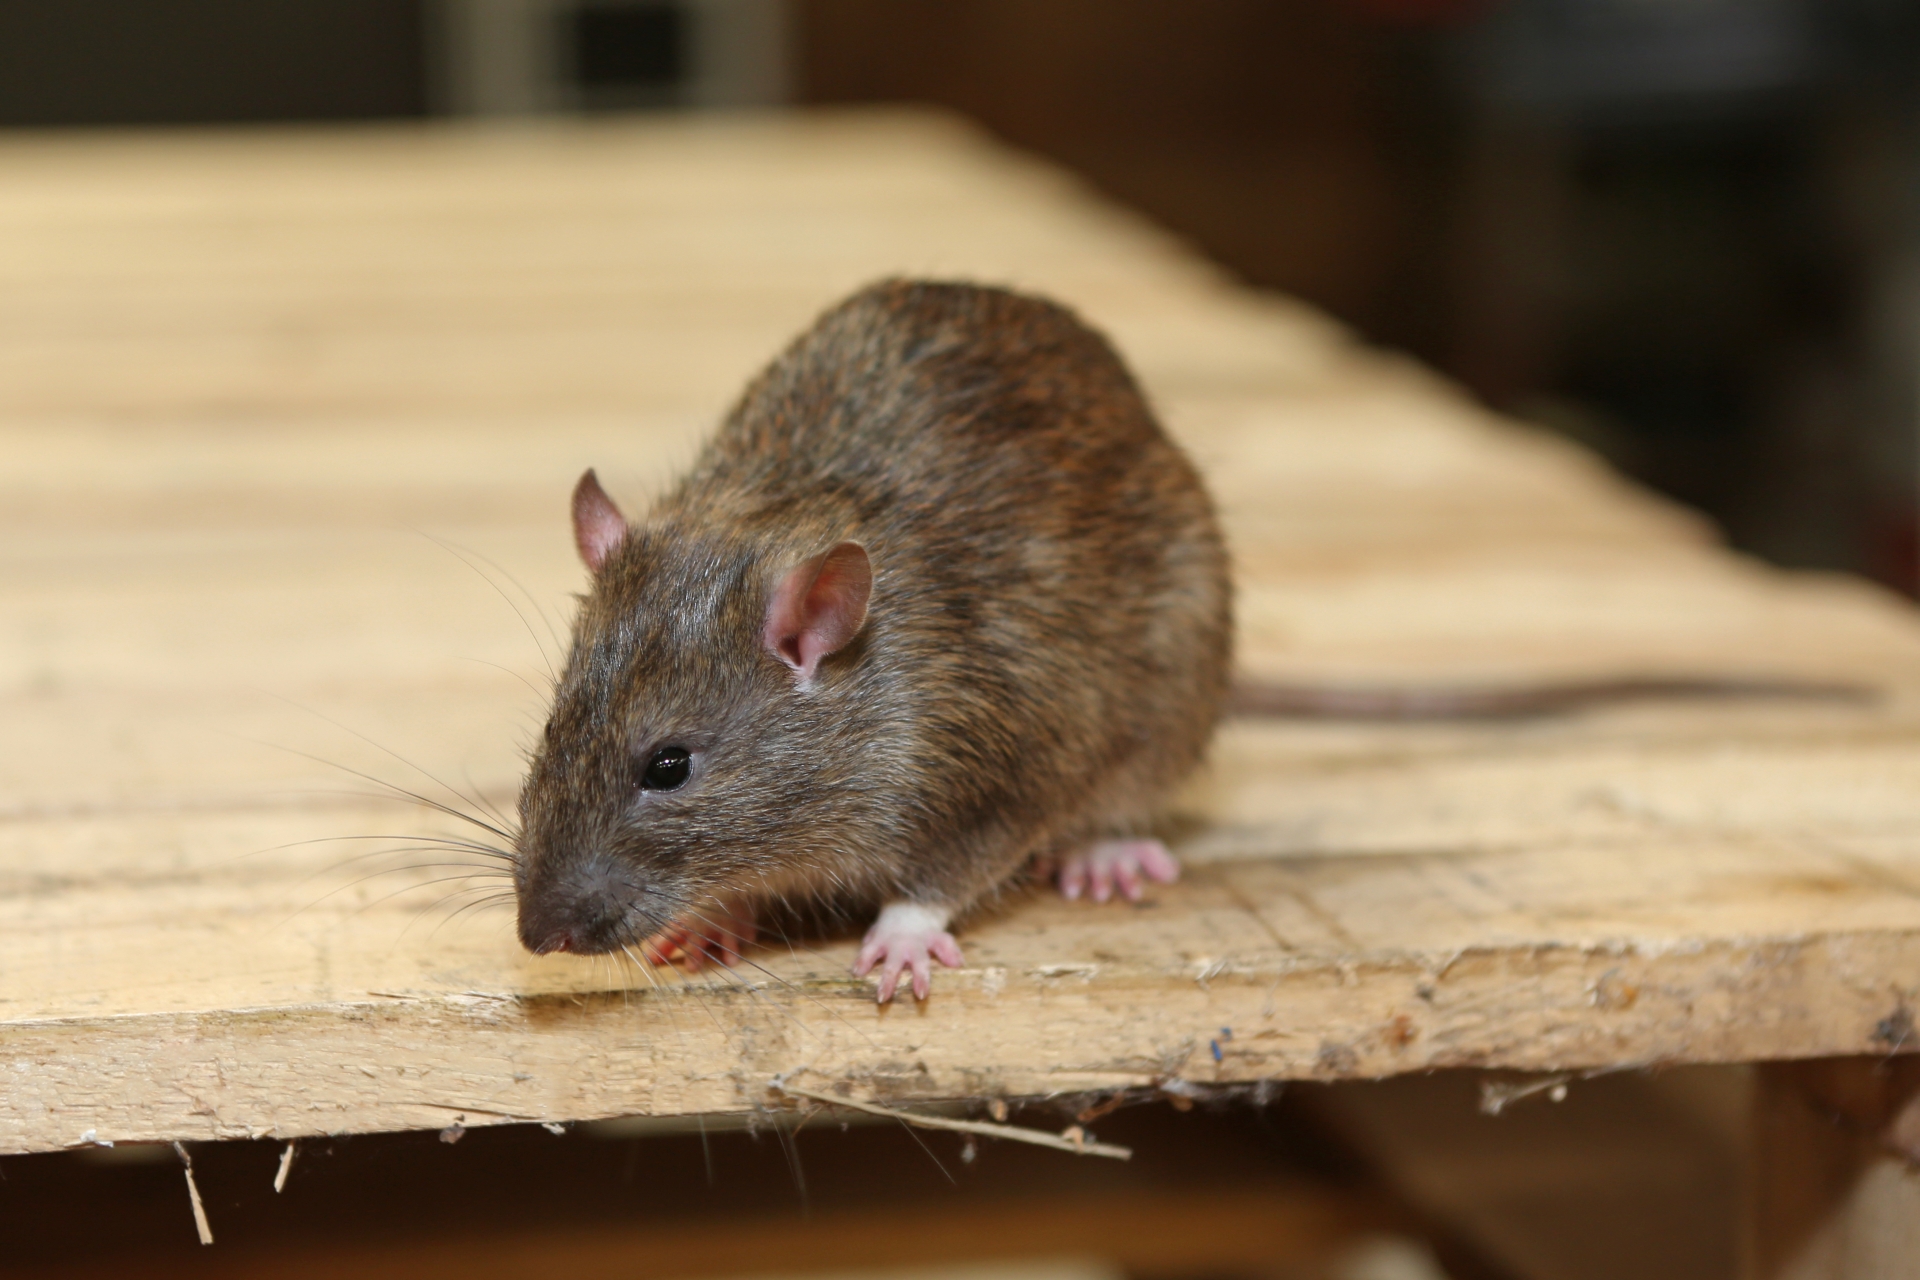 Rat extermination, Pest Control in Herne Hill, SE24. Call Now 020 8166 9746